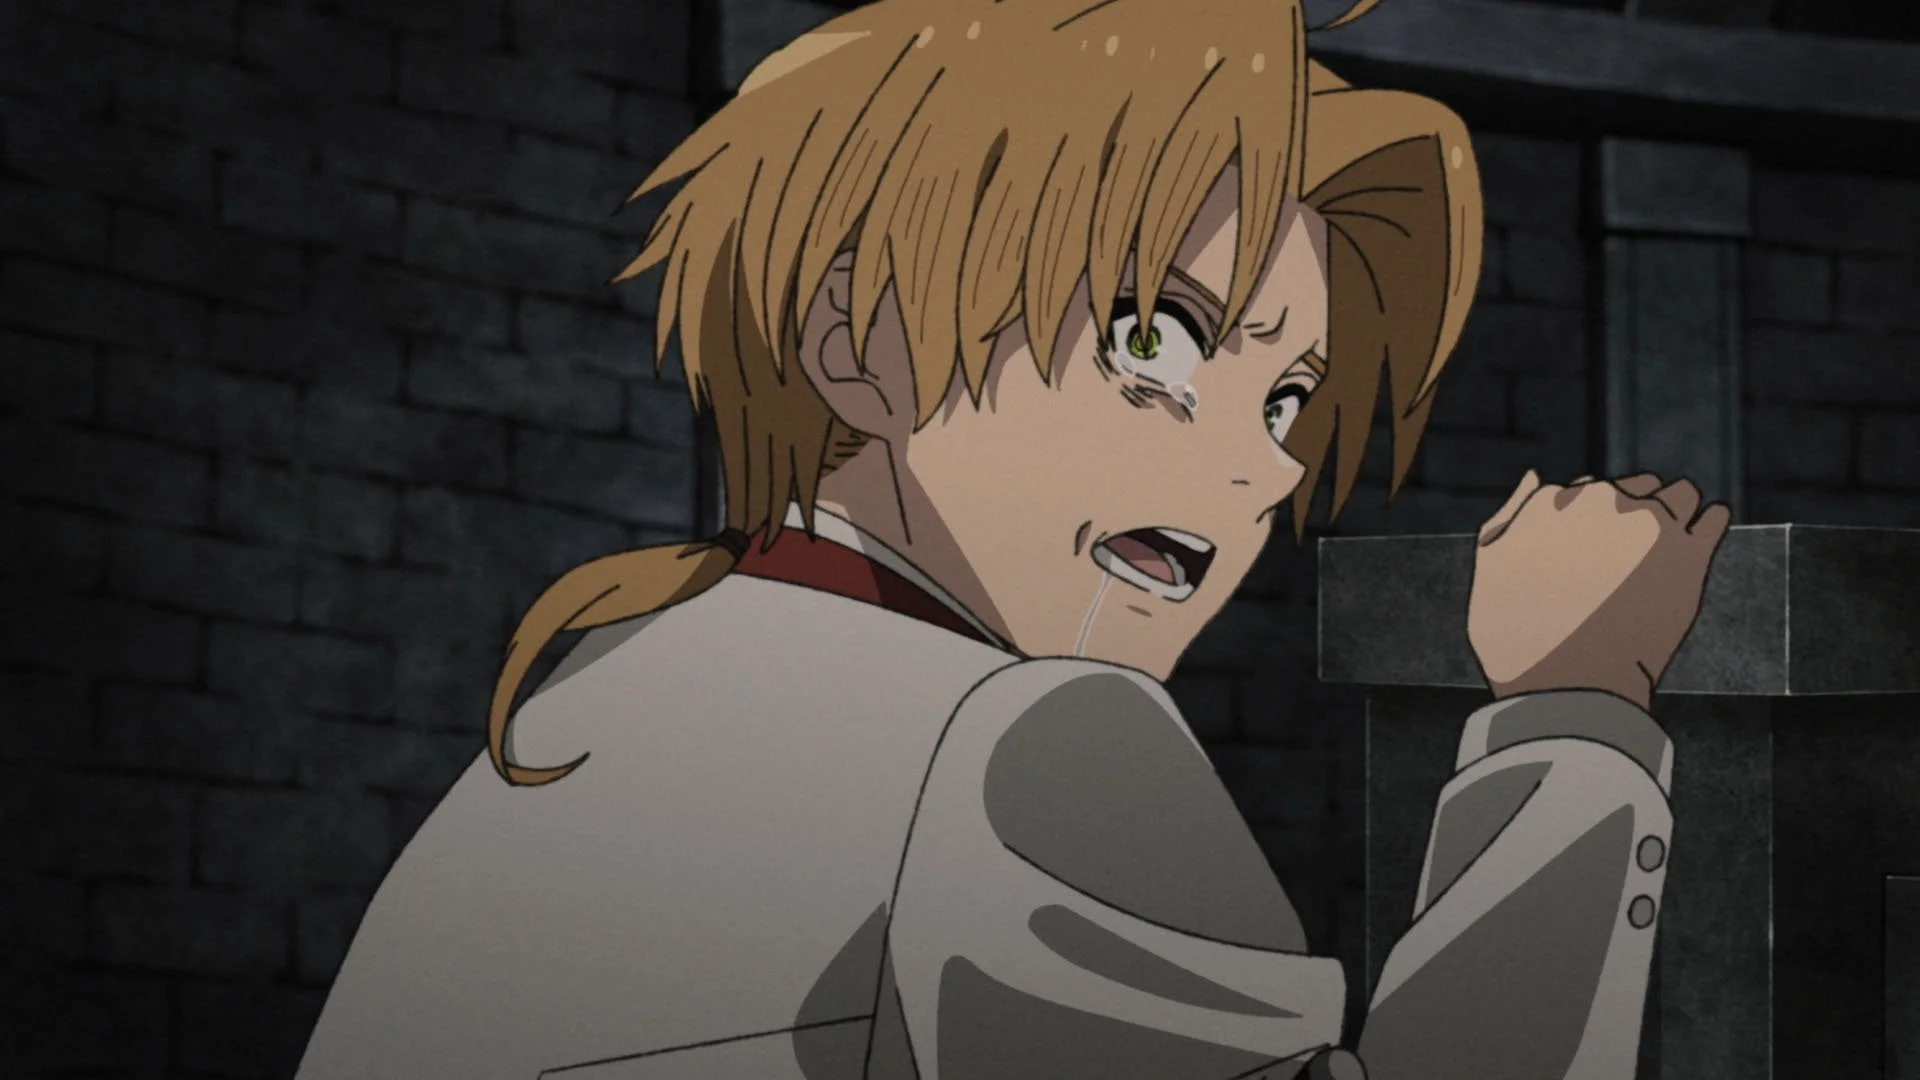 Mushoku Tensei Season 2 Episode 9 Release Date, Time, Preview Synopsis & Images, and Countdown